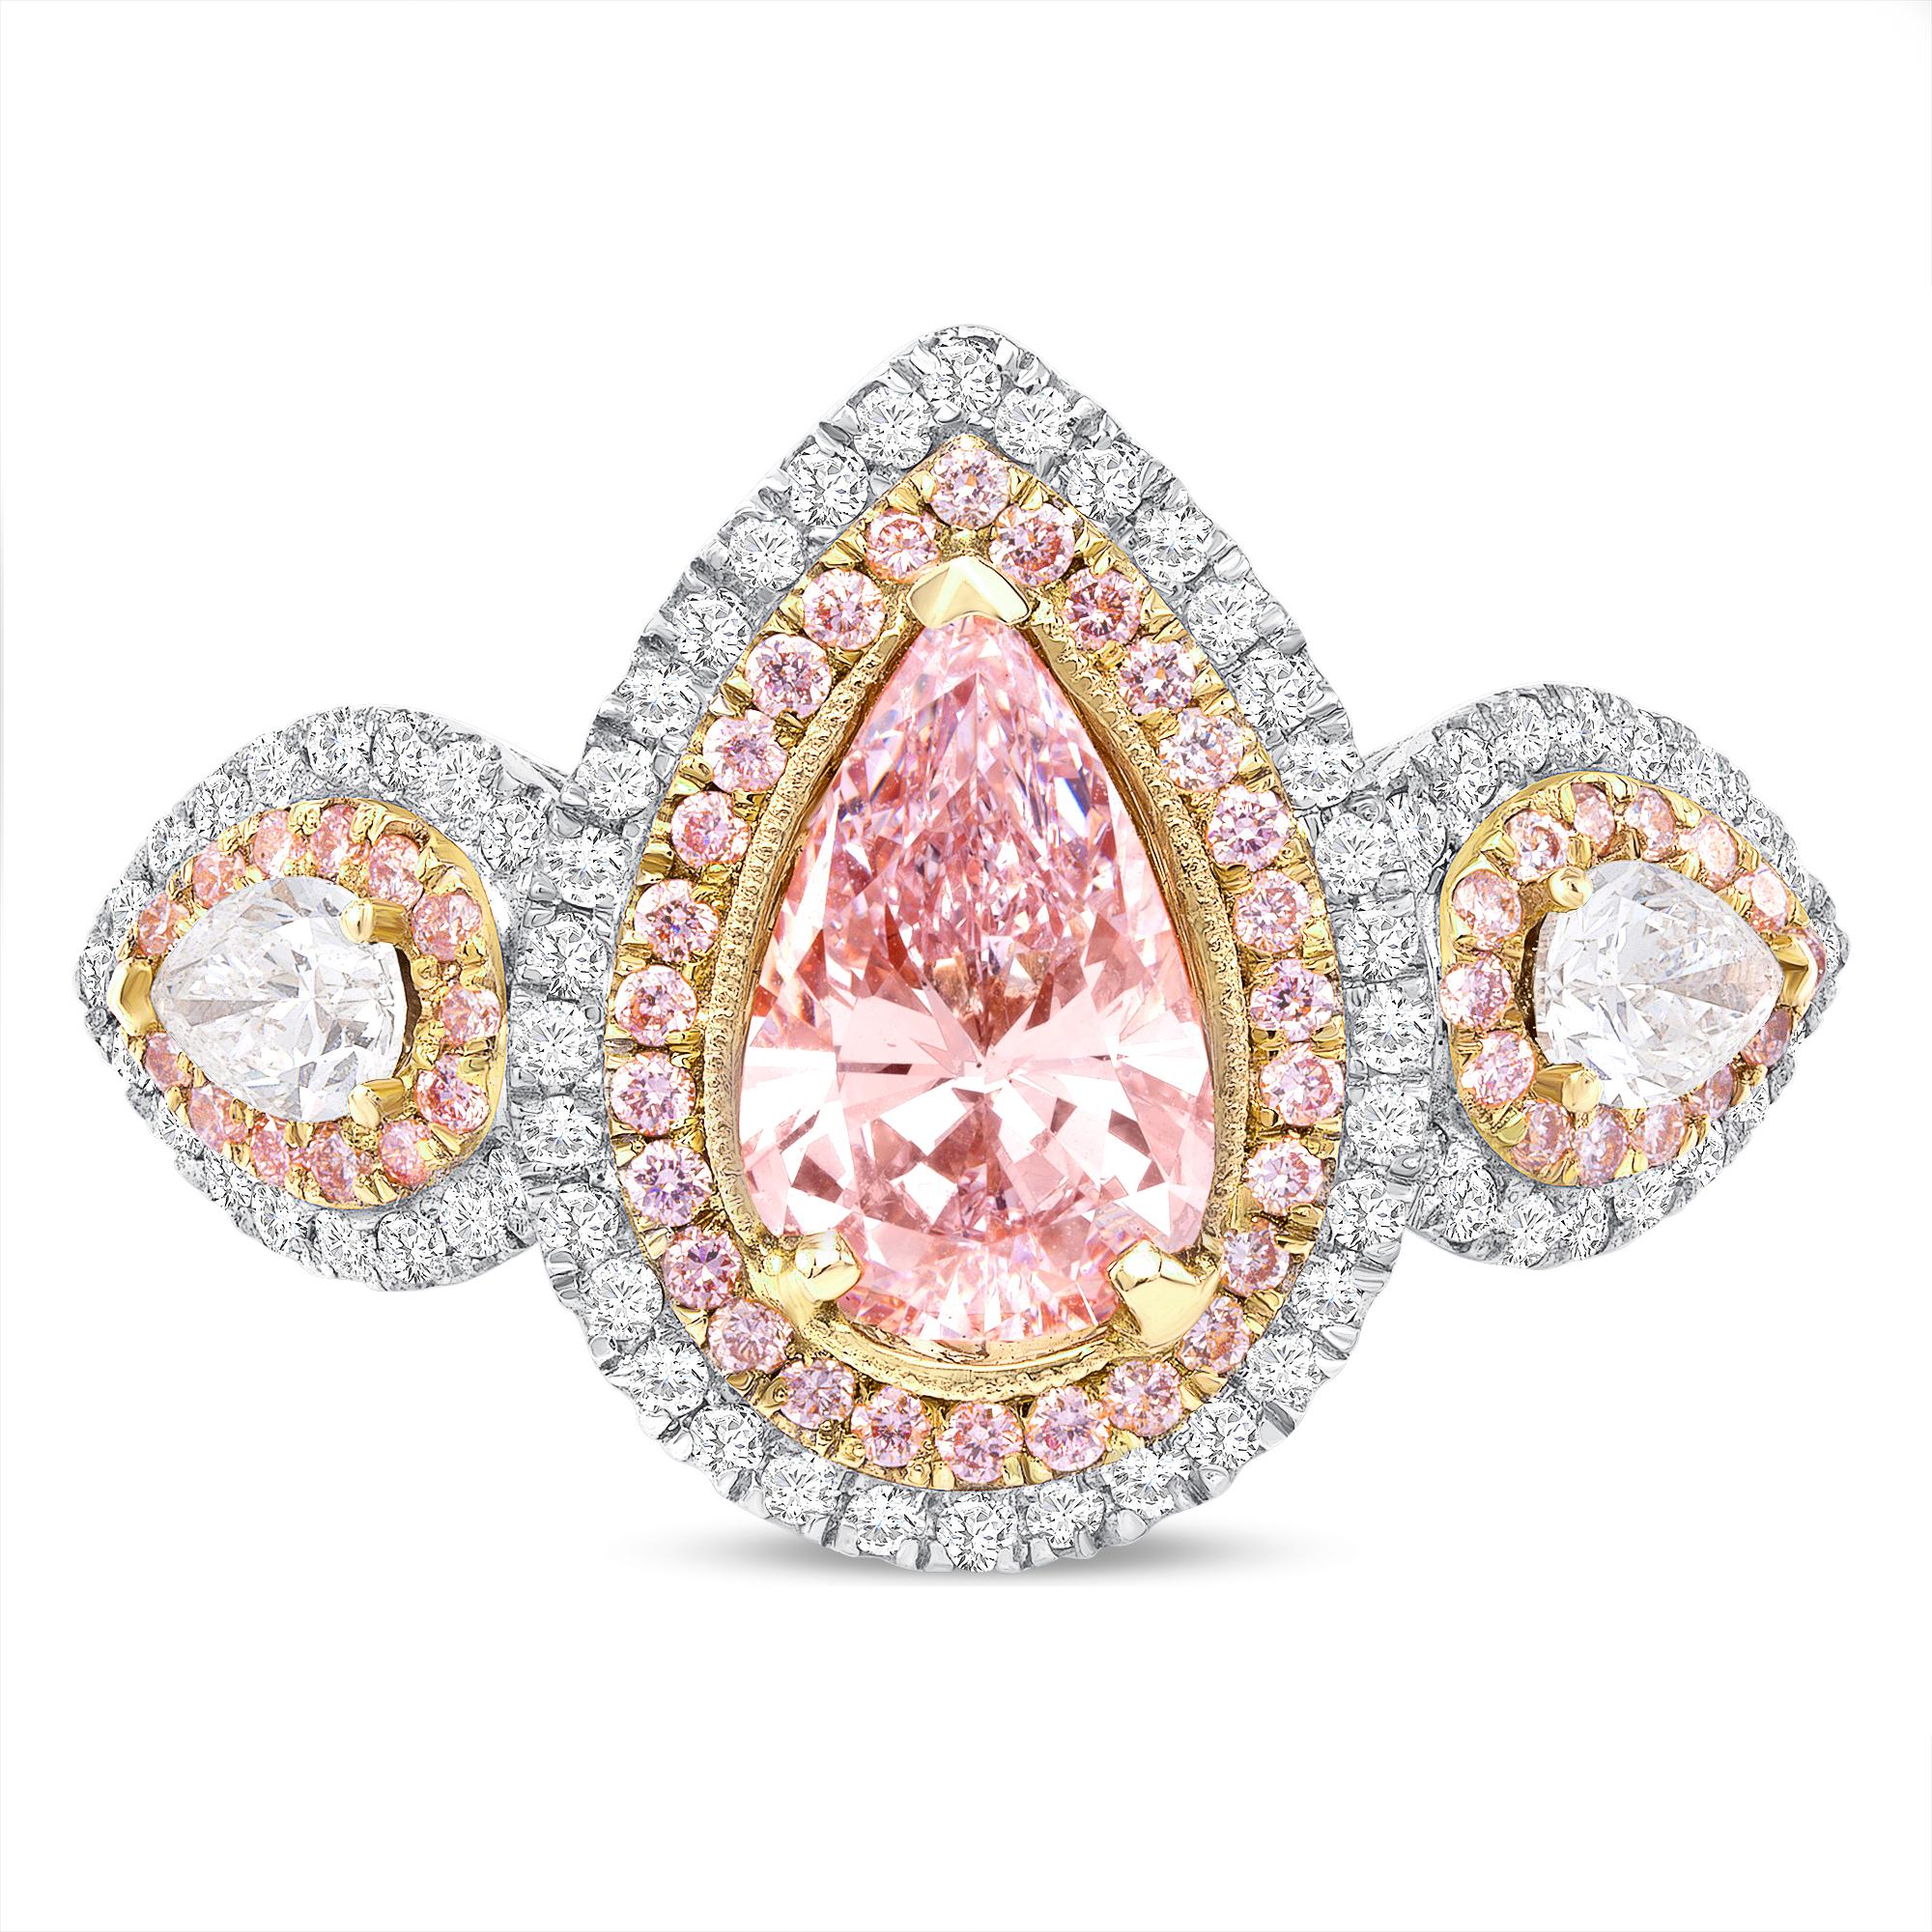 This three stone engagement ring is as rare as they come with an exotic 1.35 cts of light pink center stone and two colorless pears shapes as side stones surrounded by thousands of white and pink round diamond pave on the setting. 

GIA CERTIFIED